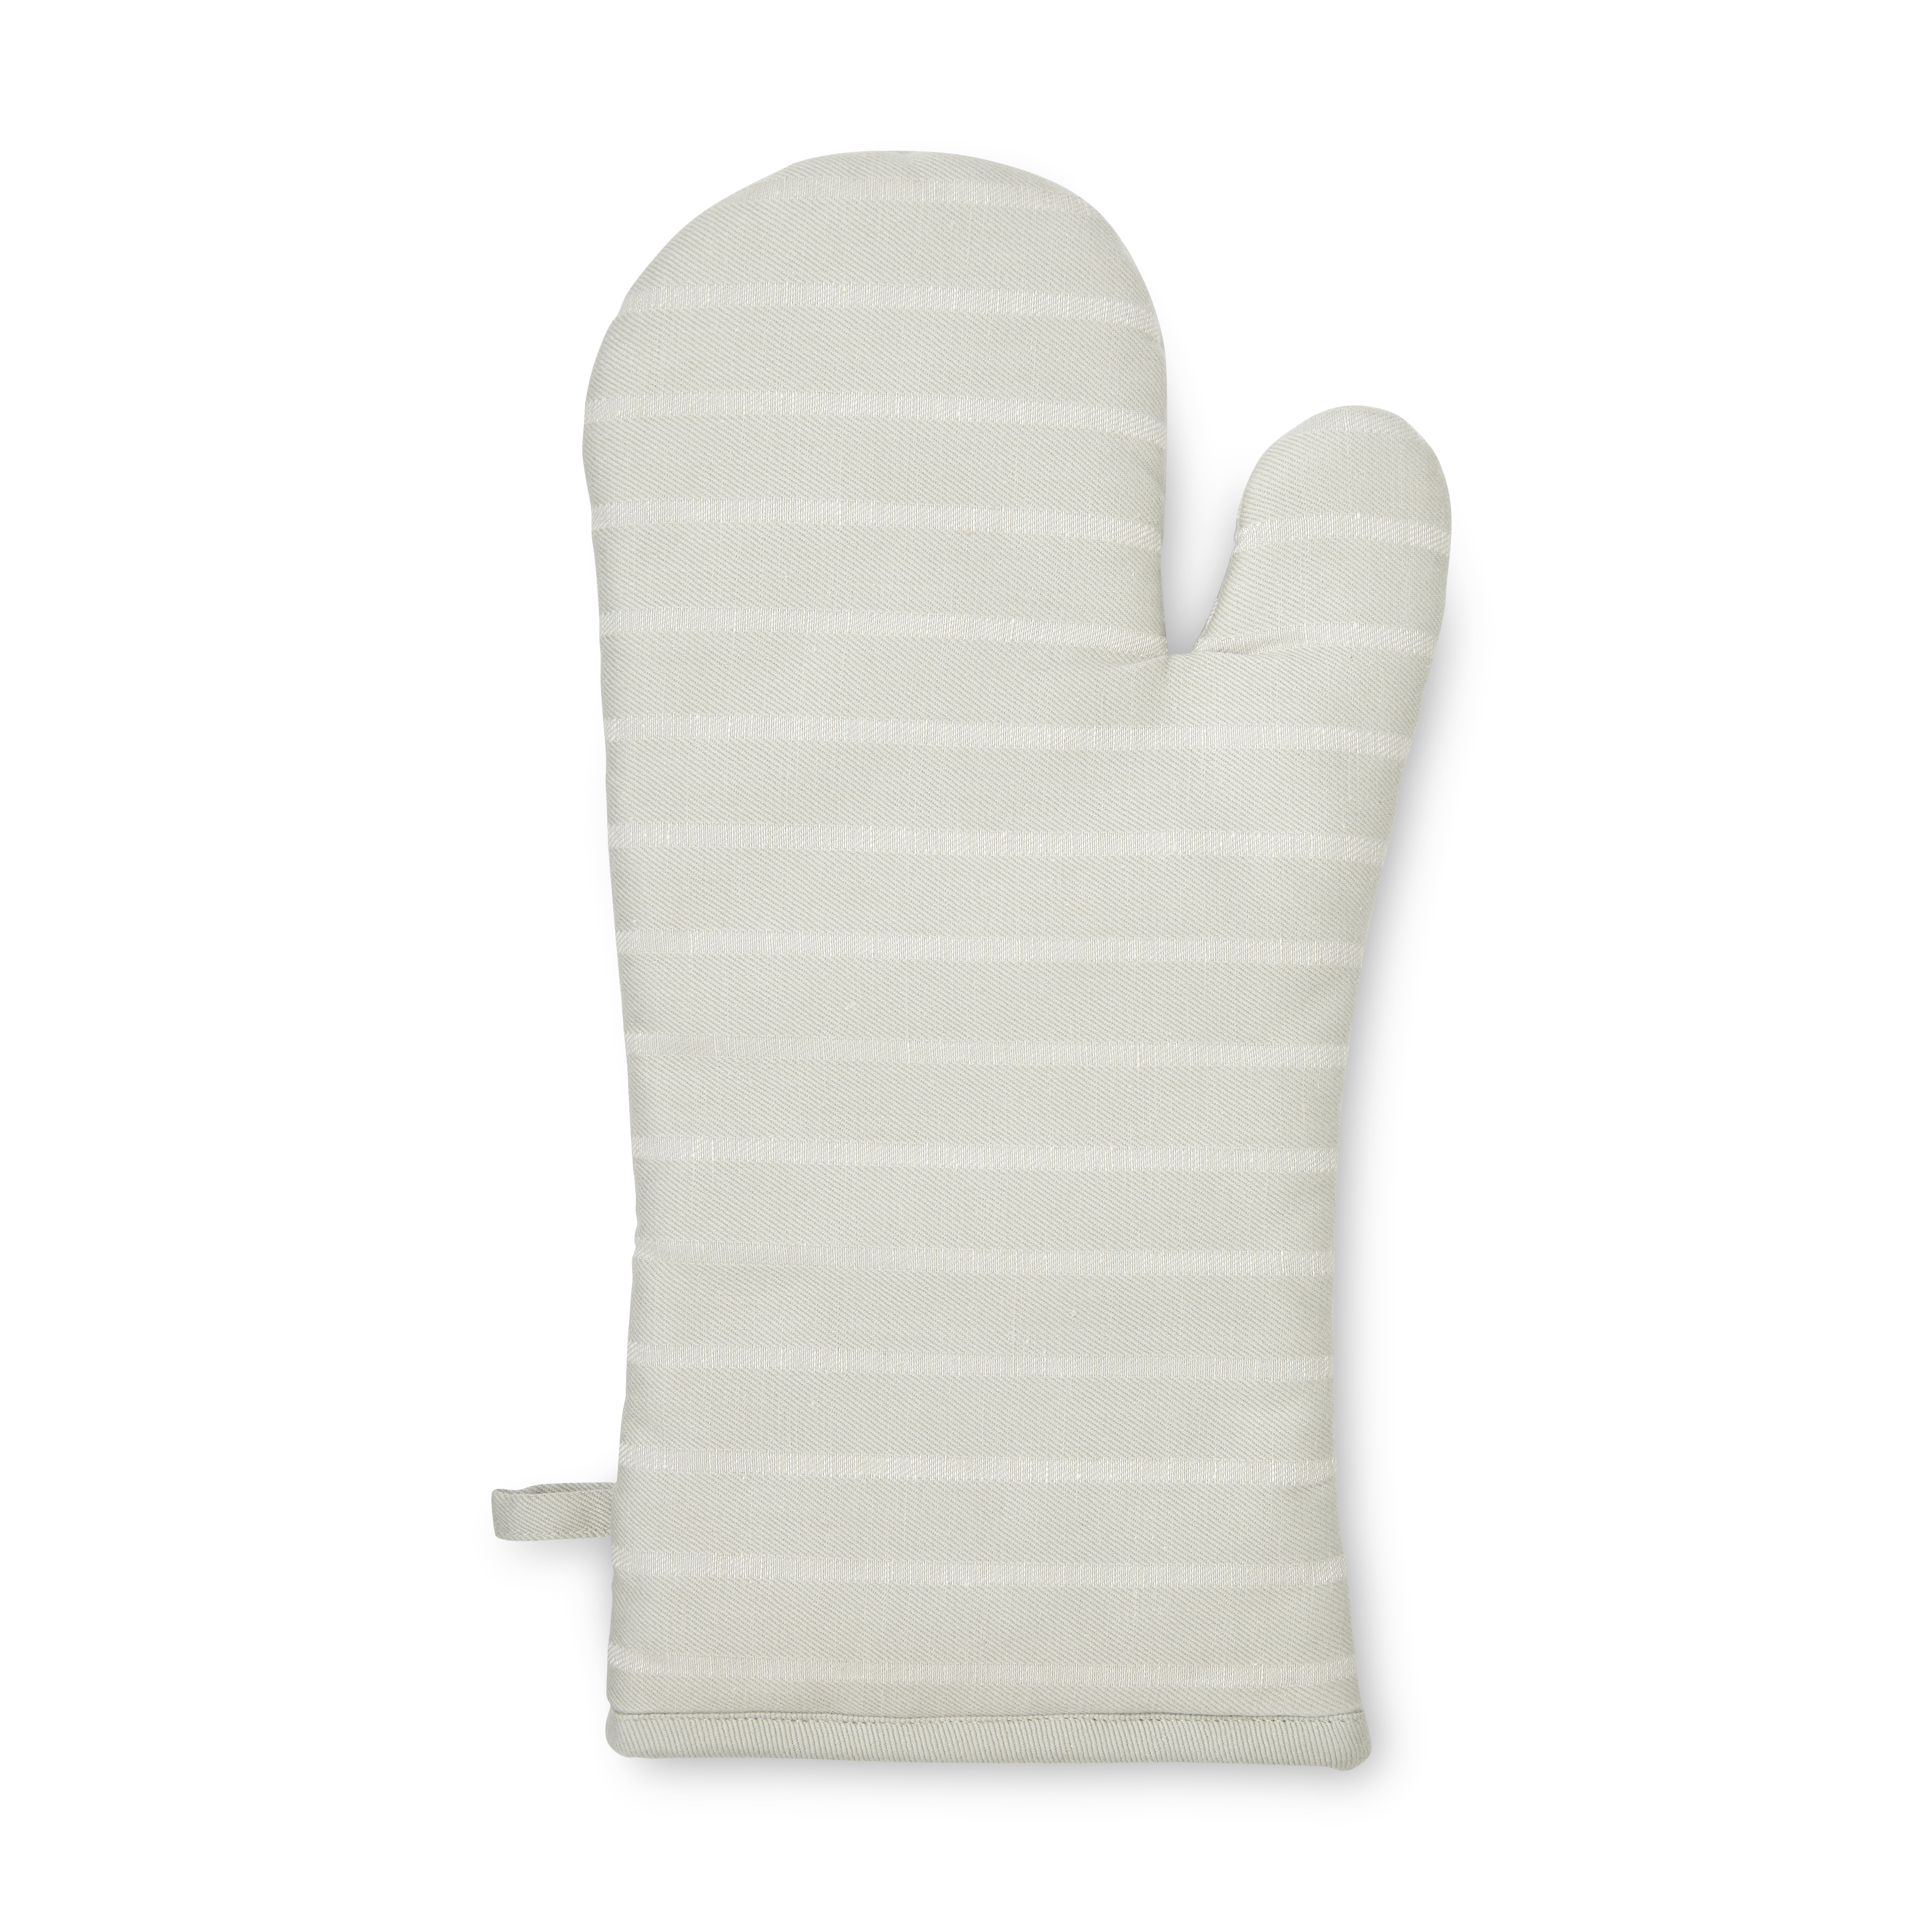 Sophie Conran French Grey Oven Mitt image number null